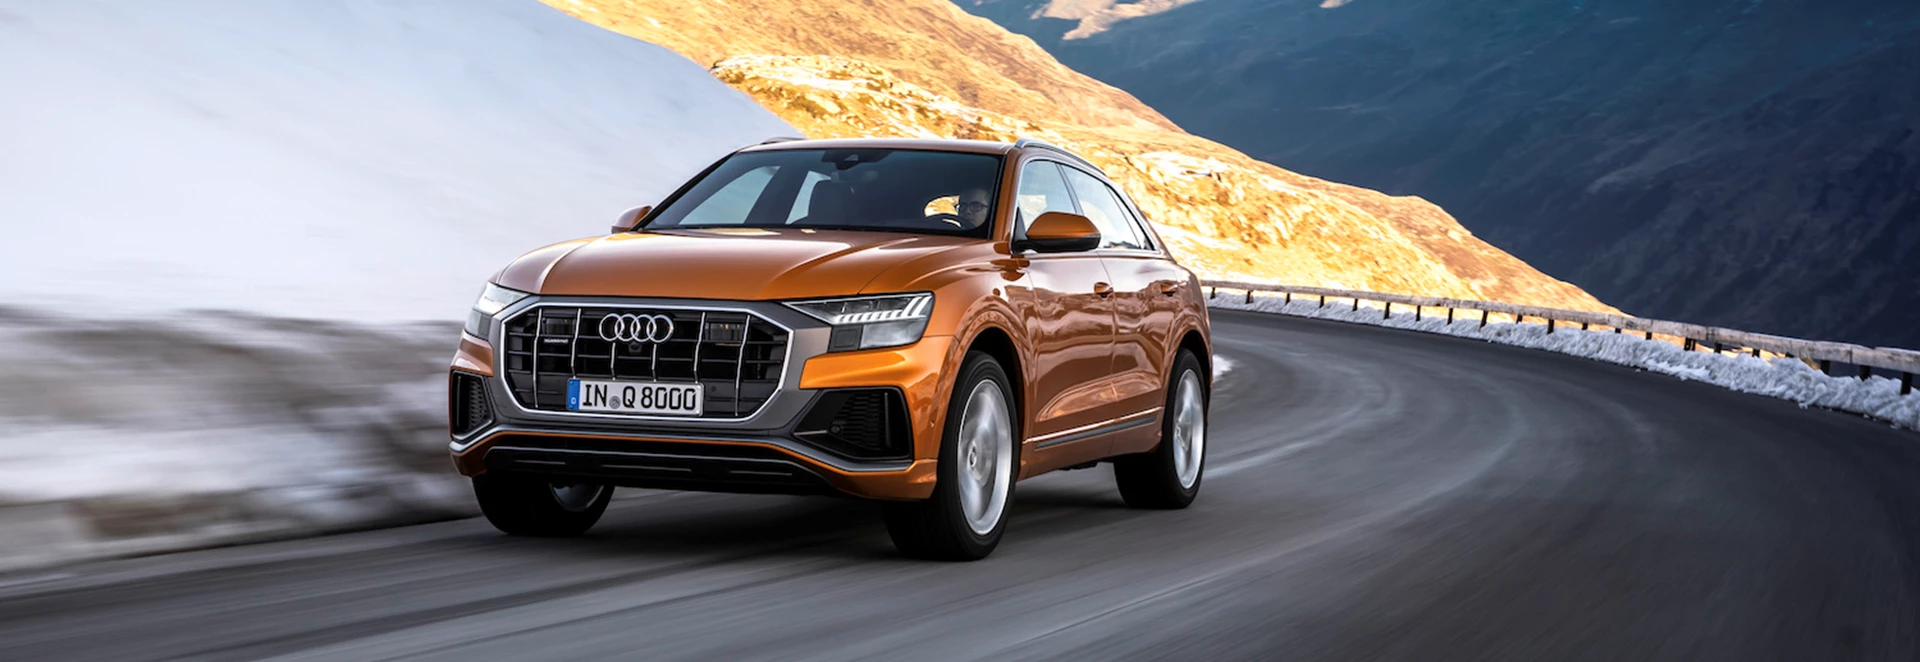 Audi adds two V6 engines to Q8 range